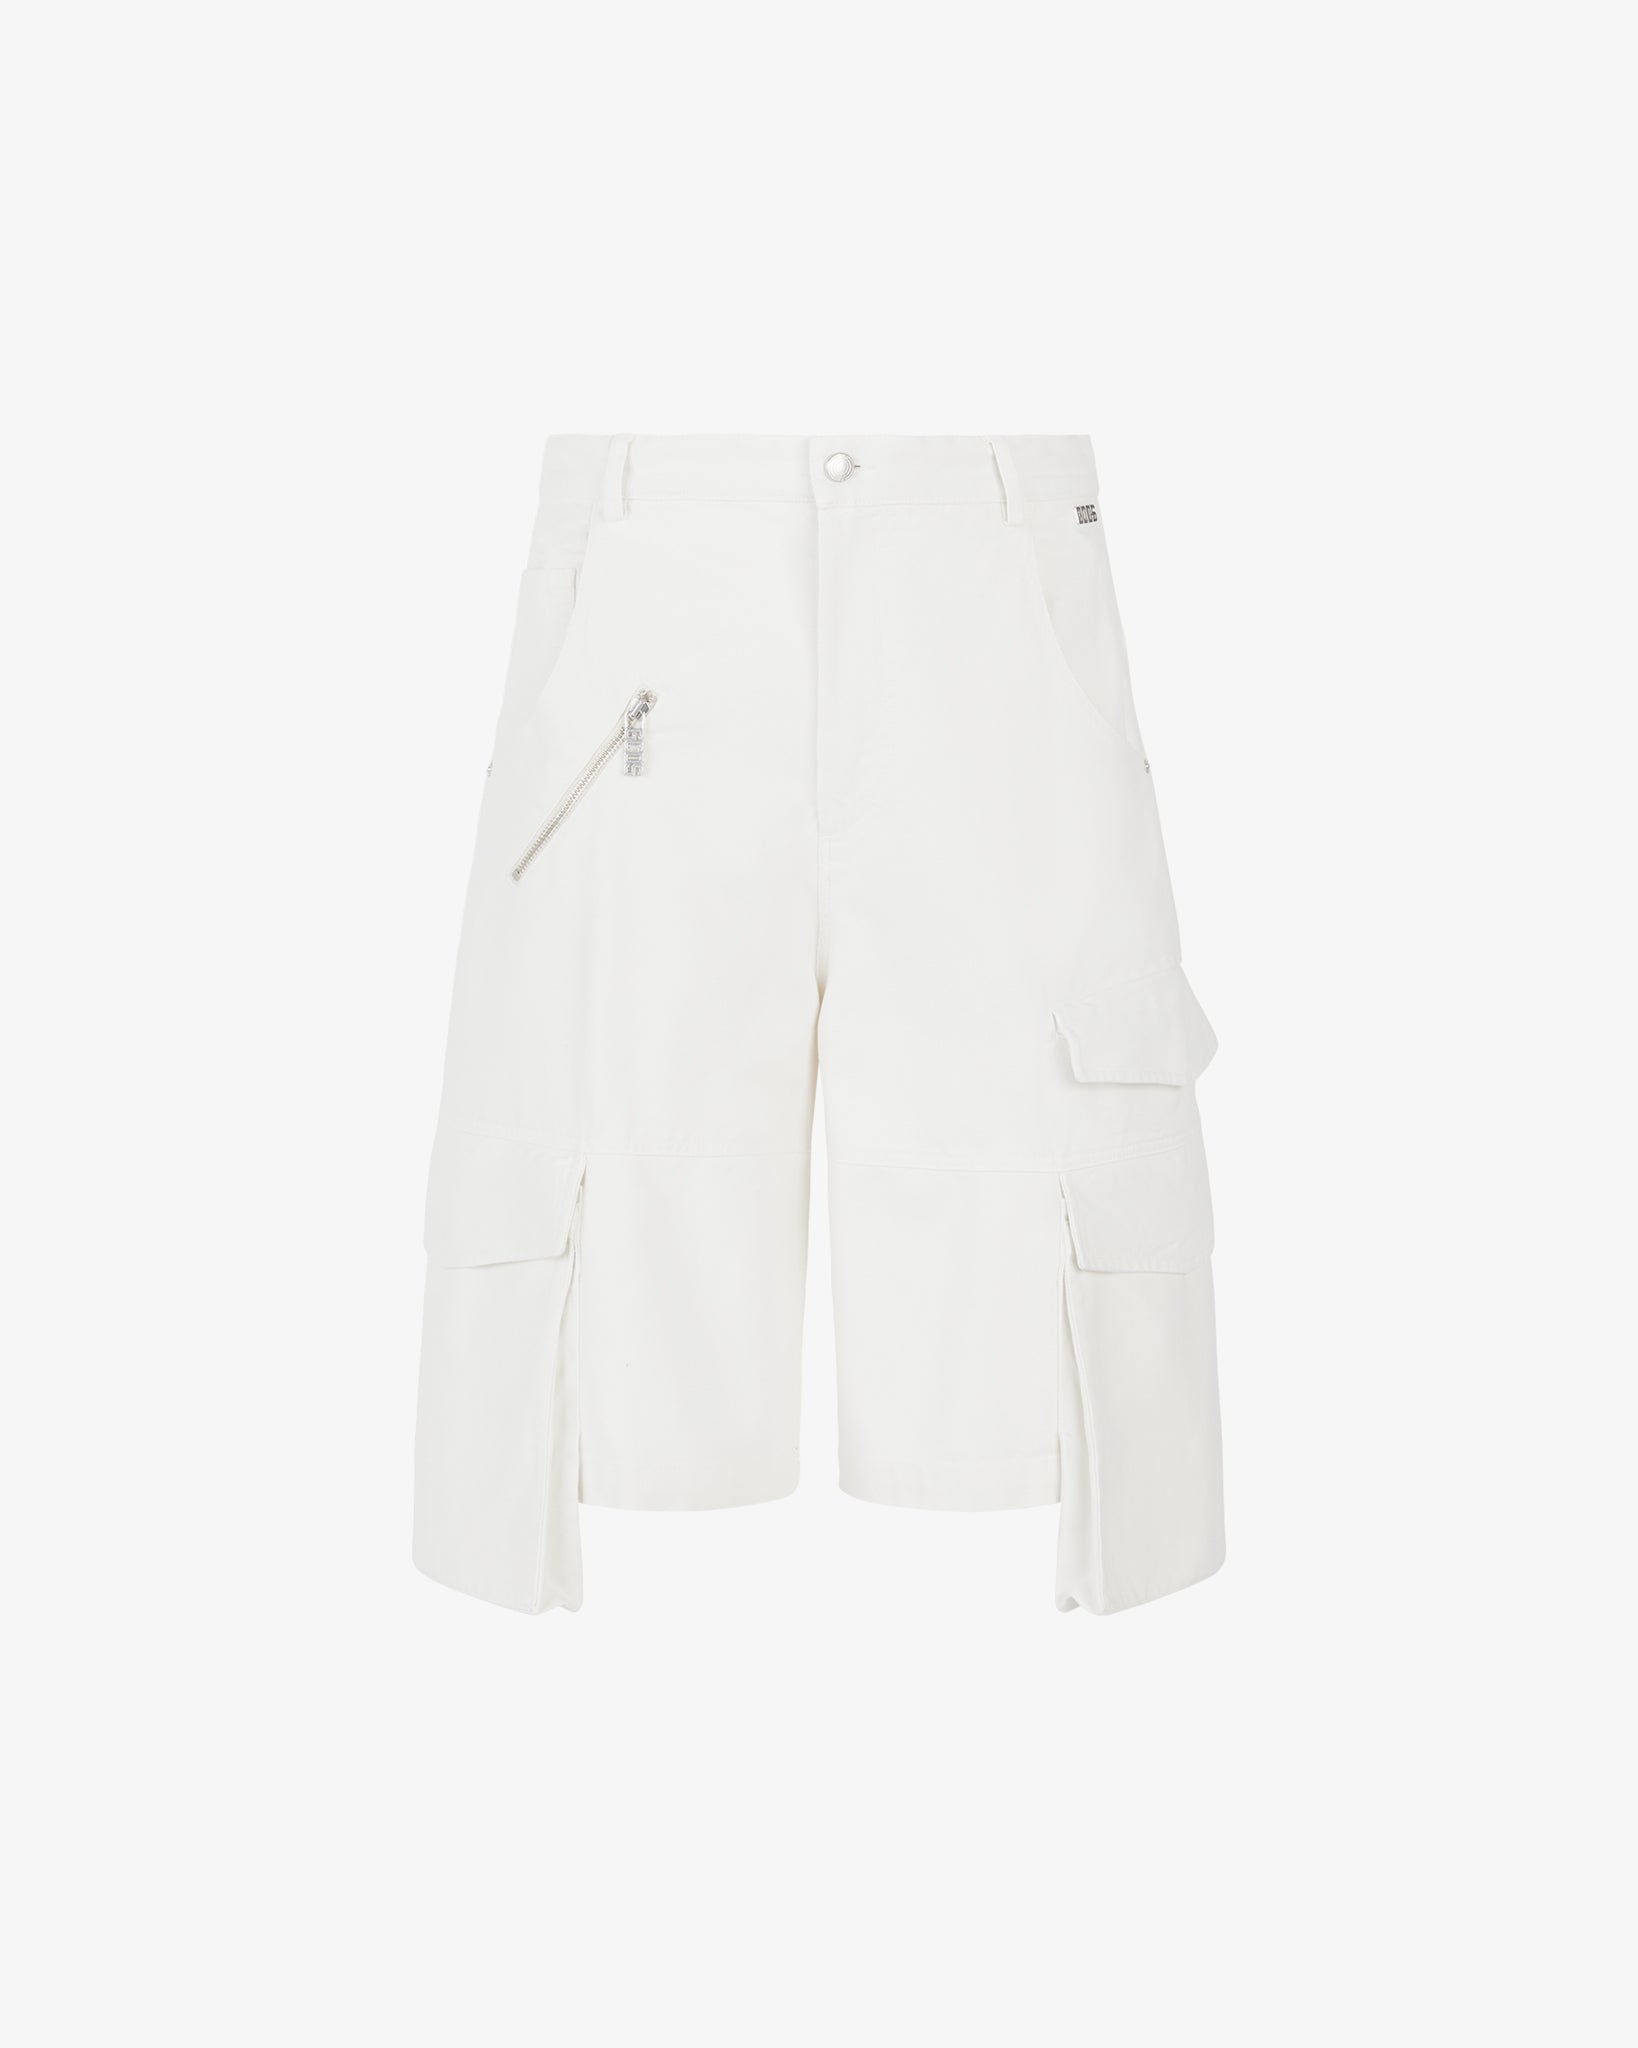 Ultracargo Trousers : Unisex Trousers Off white